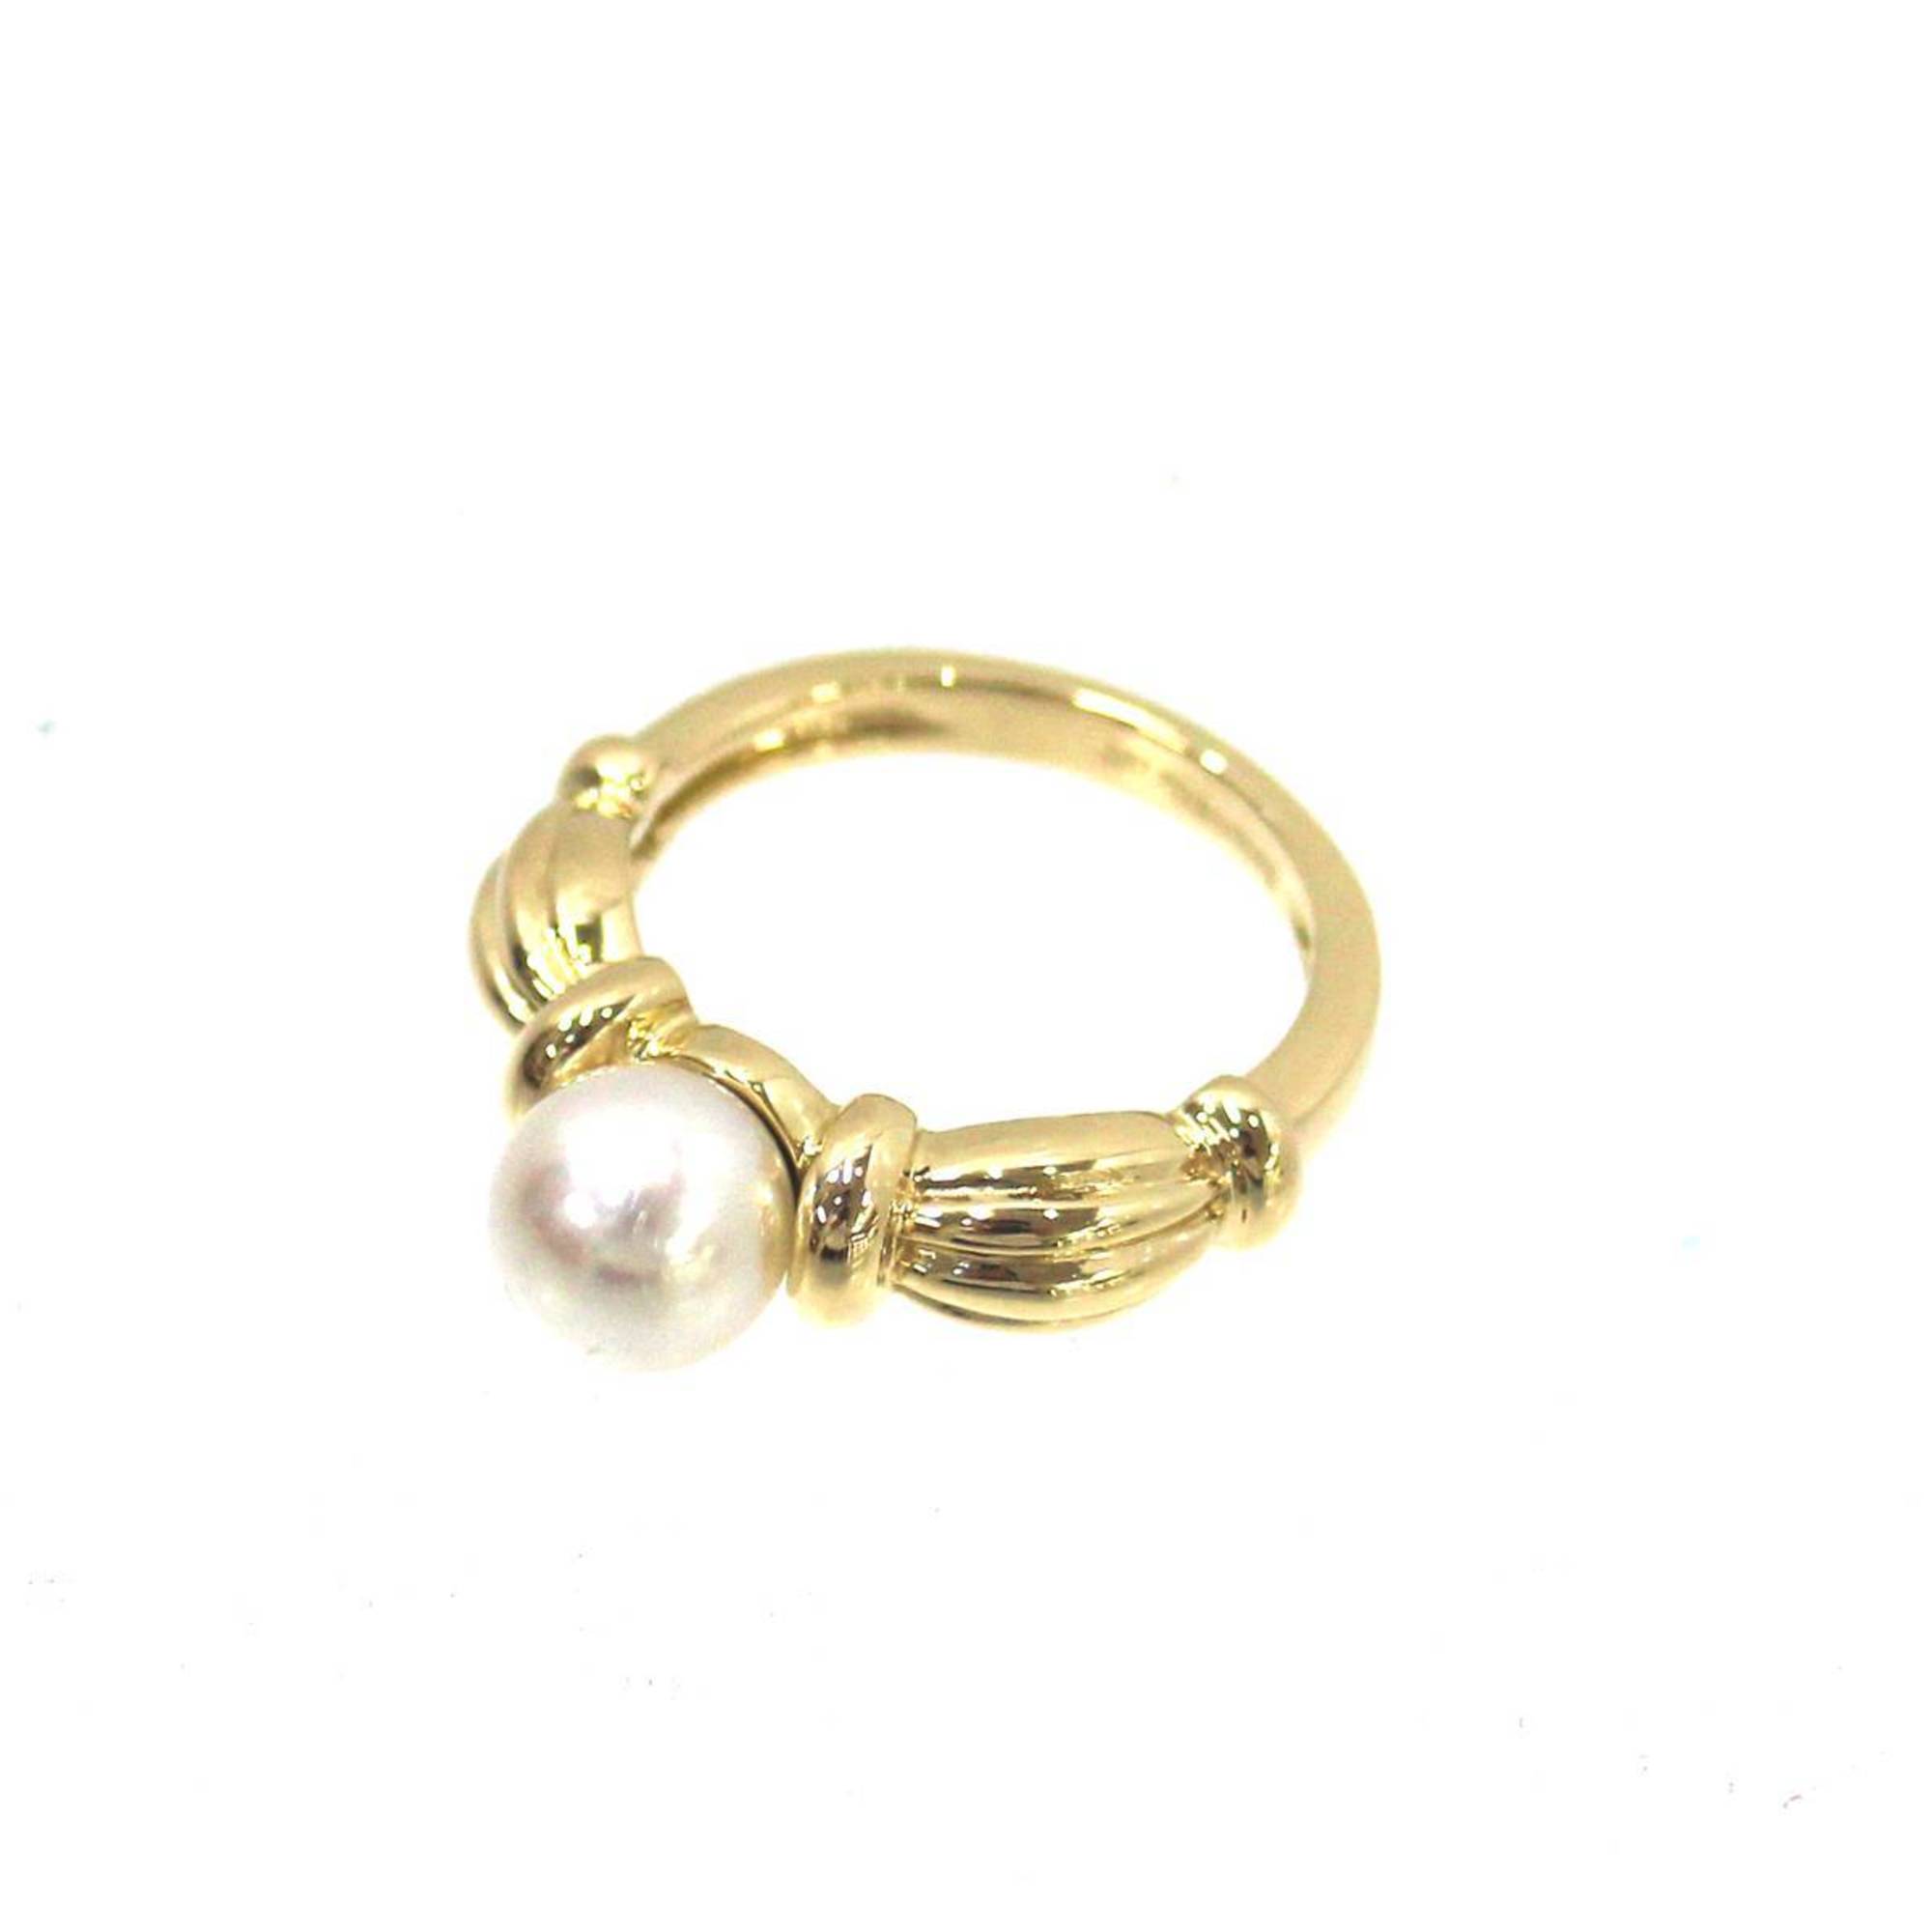 Tiffany & Co. K18 pearl ring, YG, size 10, weight approx. 5.8g